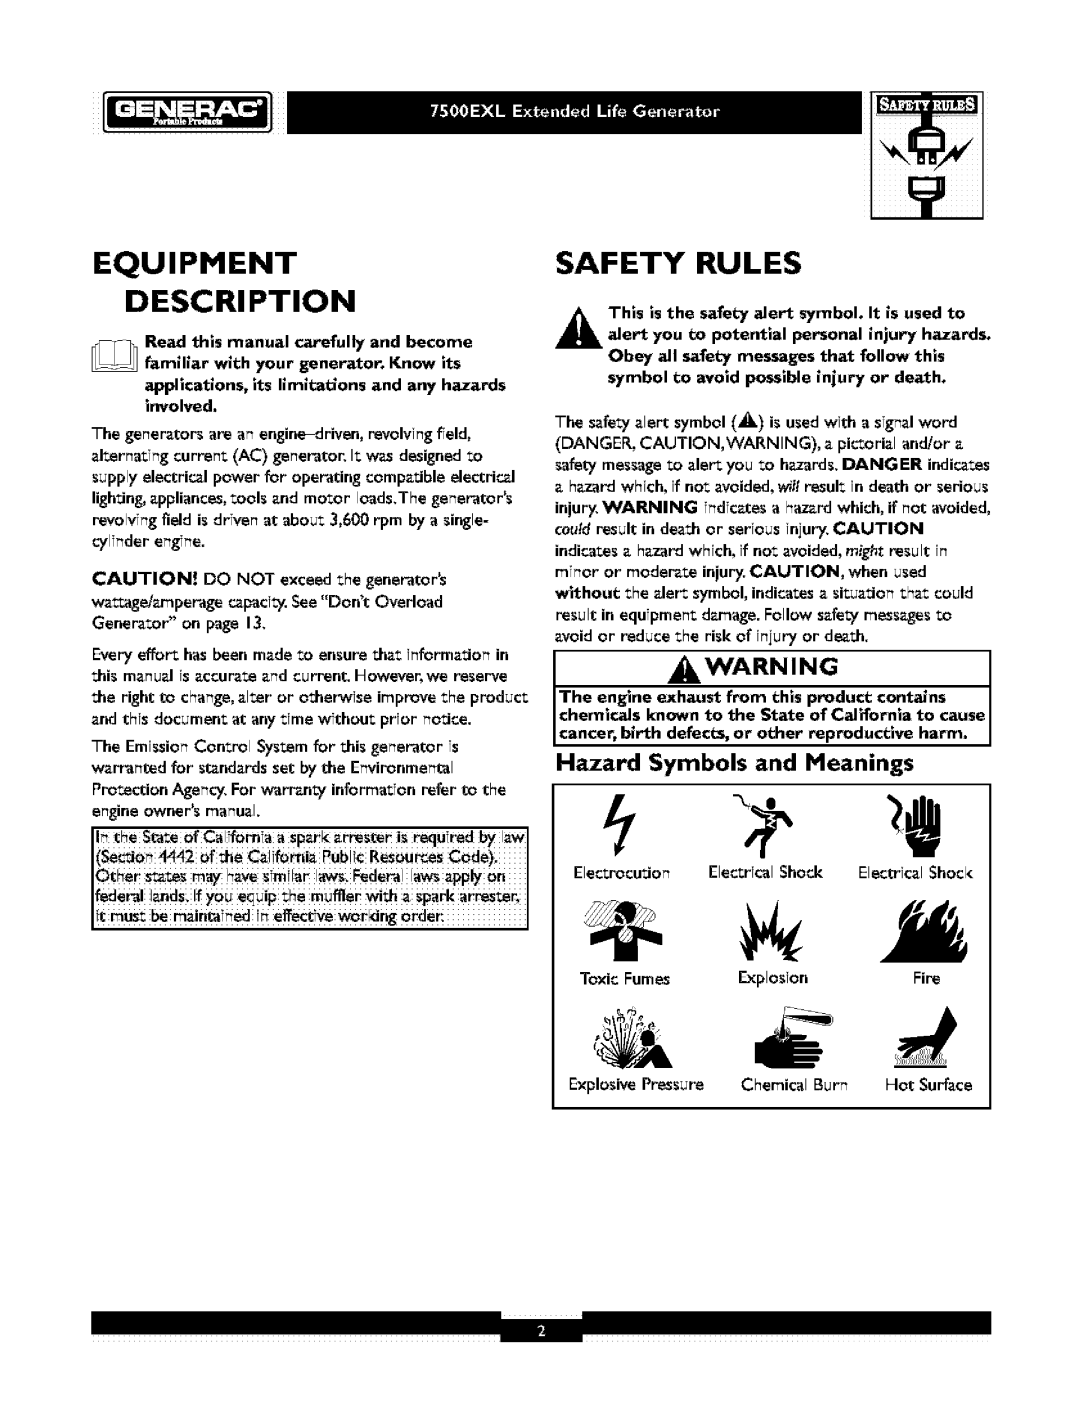 Generac 1019-3 owner manual Equipment Description, Safety Rules, Hazard Symbols and Meanings 